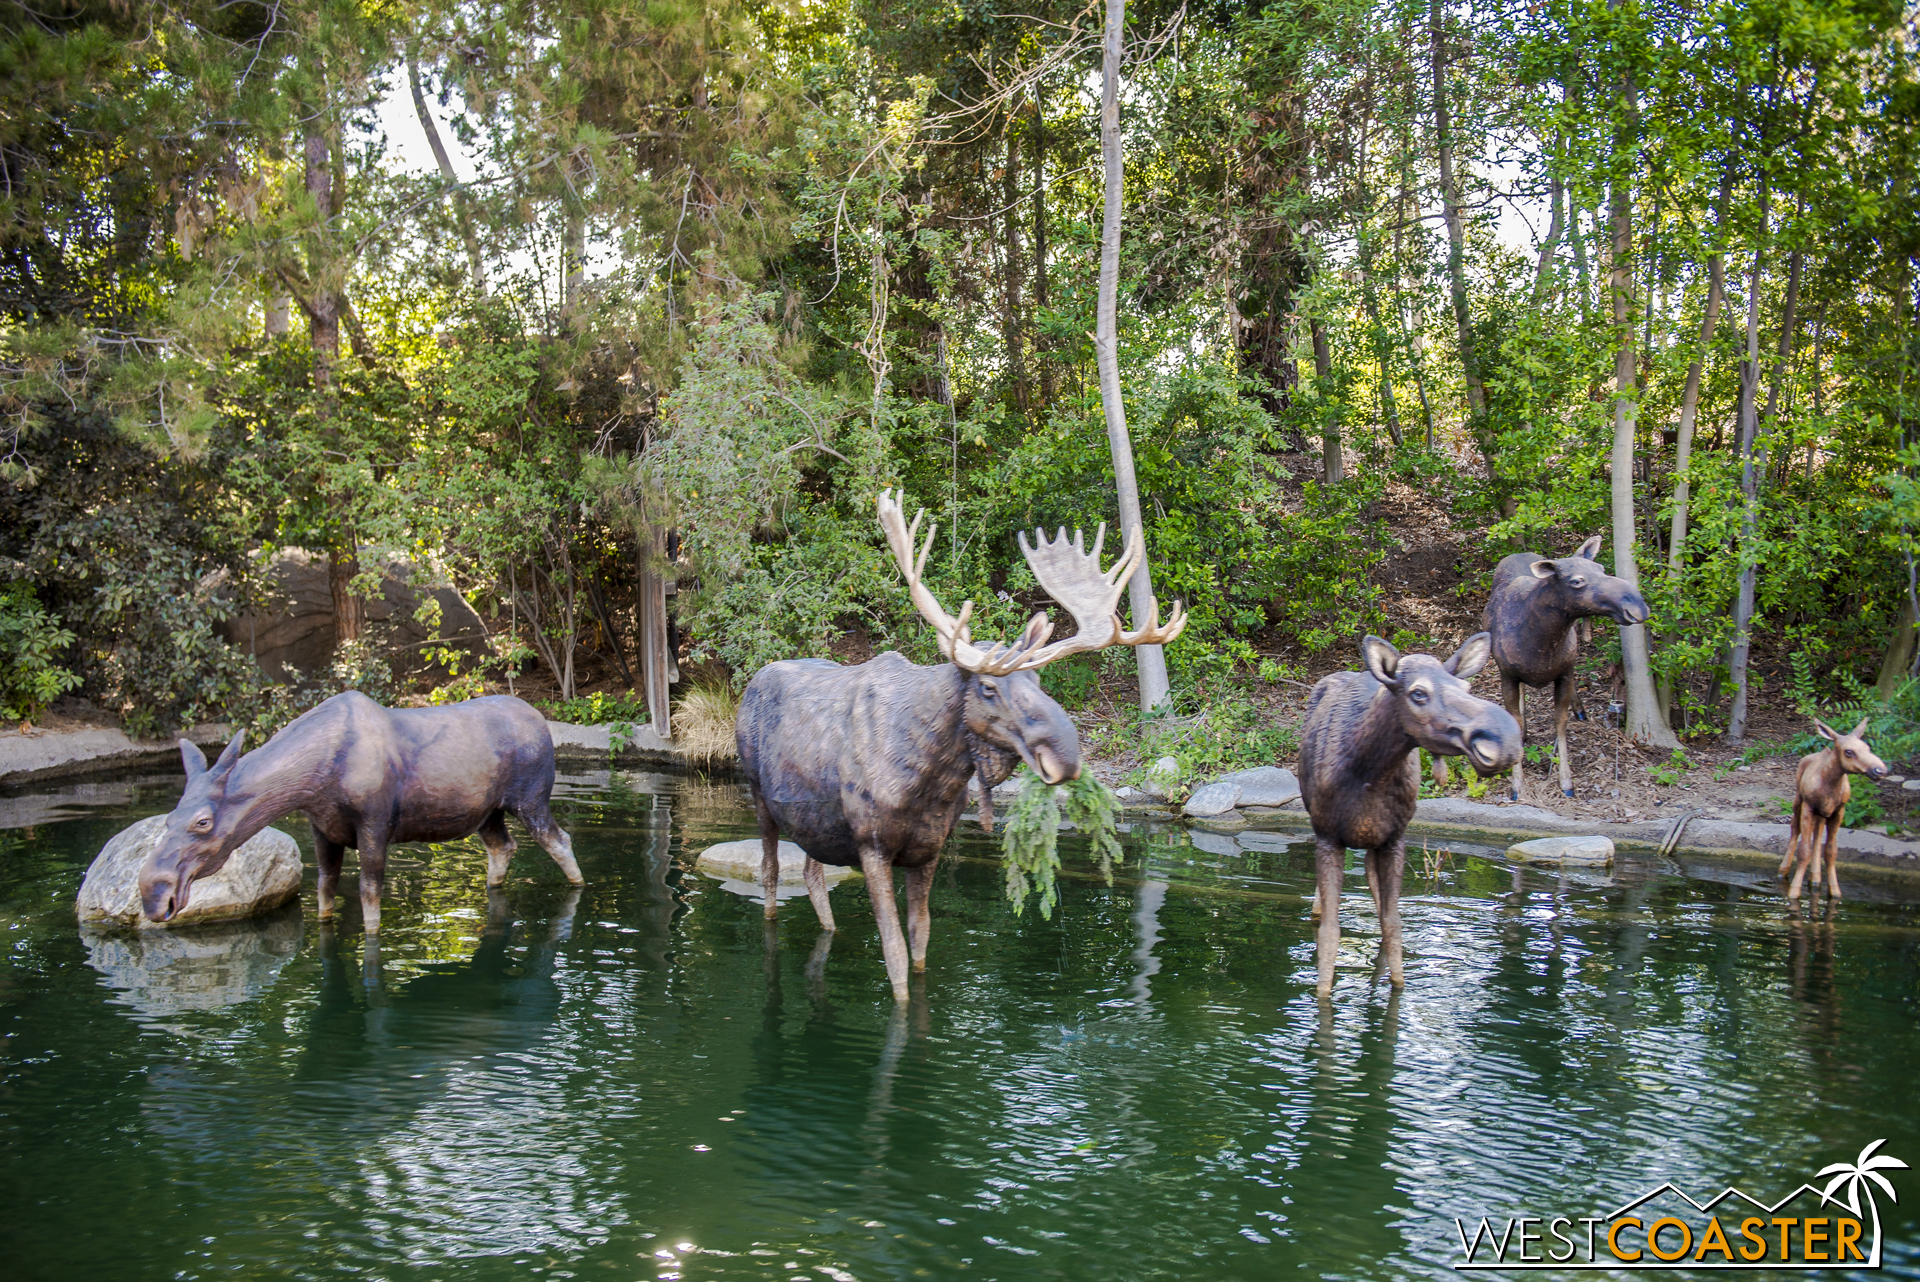  As we continue along, we spot moose along Tom Sawyer Island, perfect for weight lifting, as DizFitters are apt to do. 